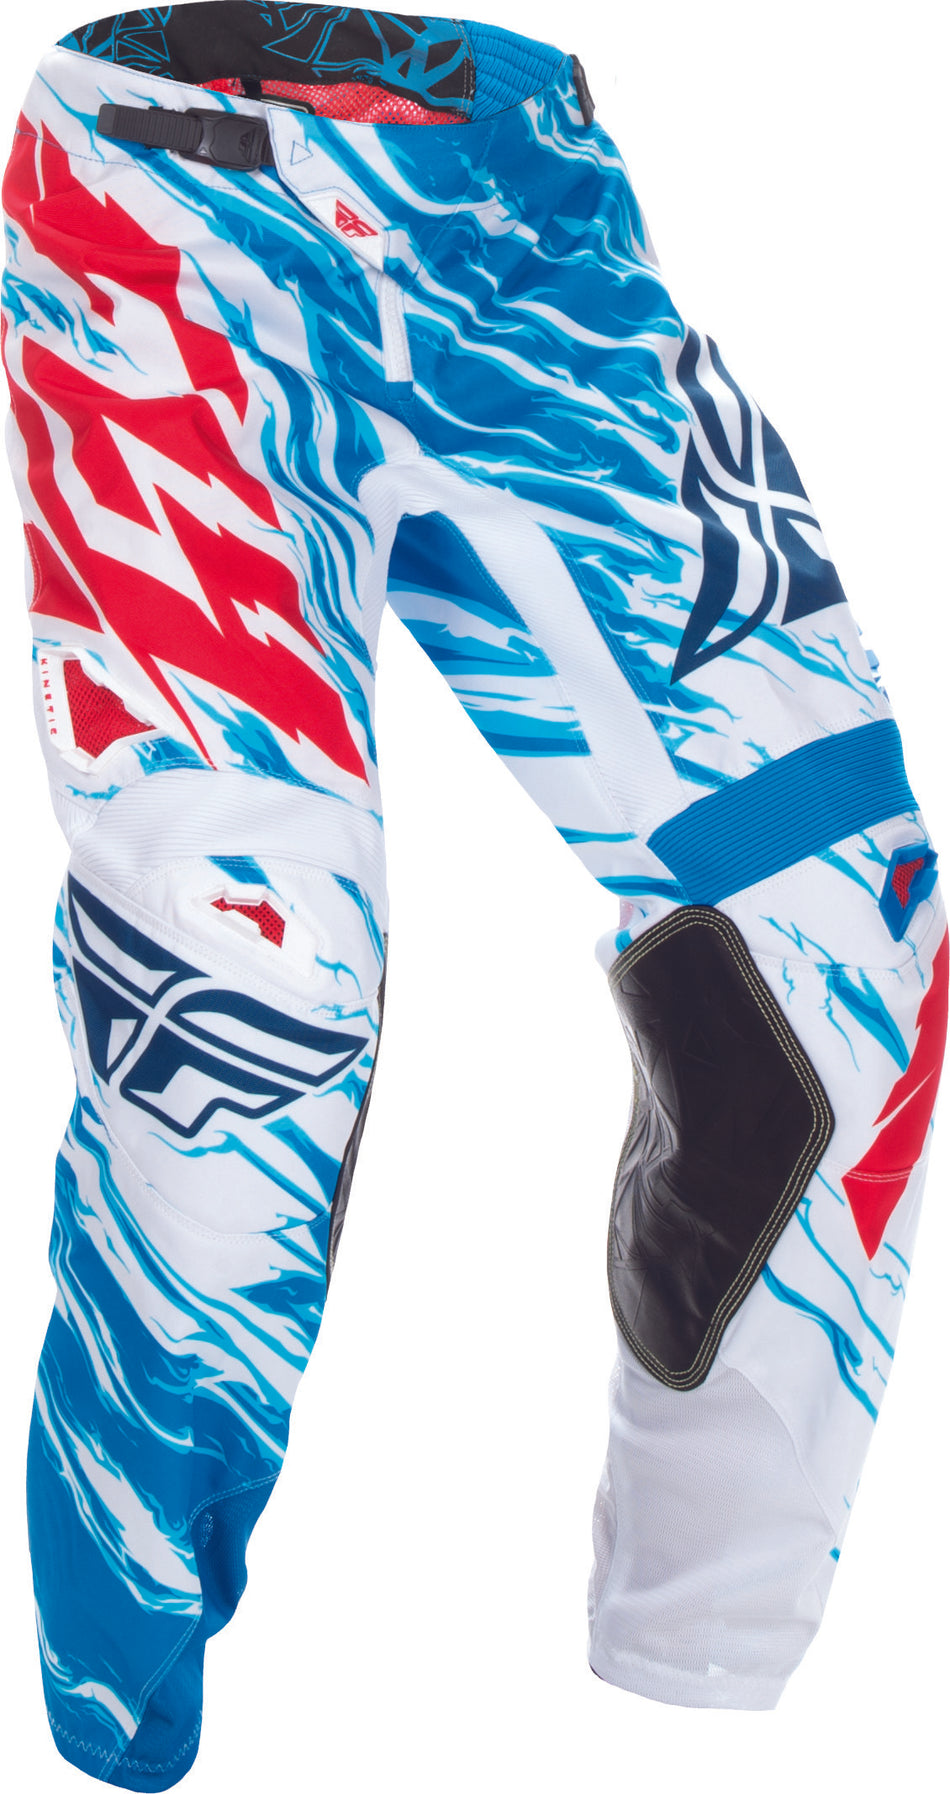 FLY RACING Kinetic Relapse Pant Red/White/Blue Sz 28 370-43228